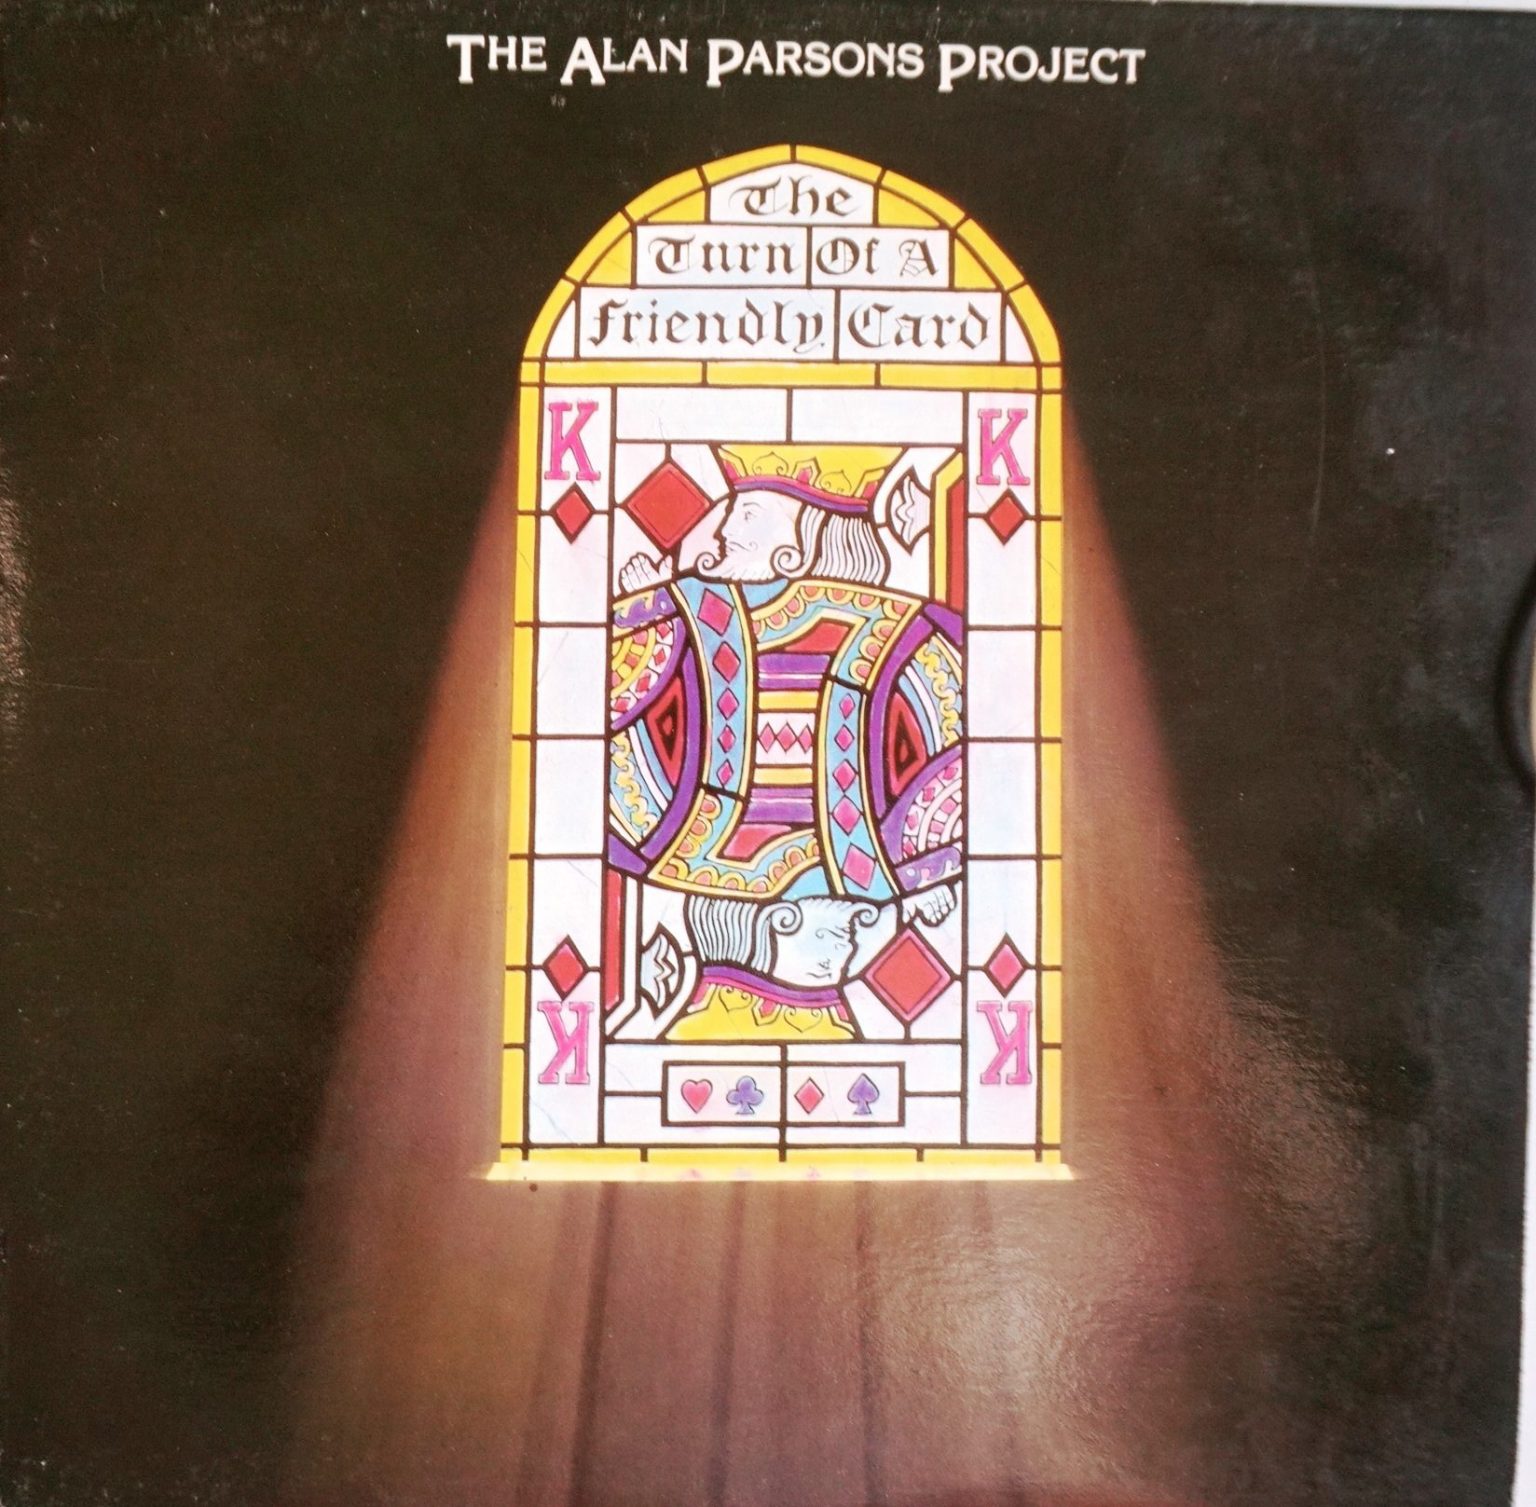 The Alan Parsons Project – The Turn Of A Friendly Card [Vinyl LP] (VG/VG)